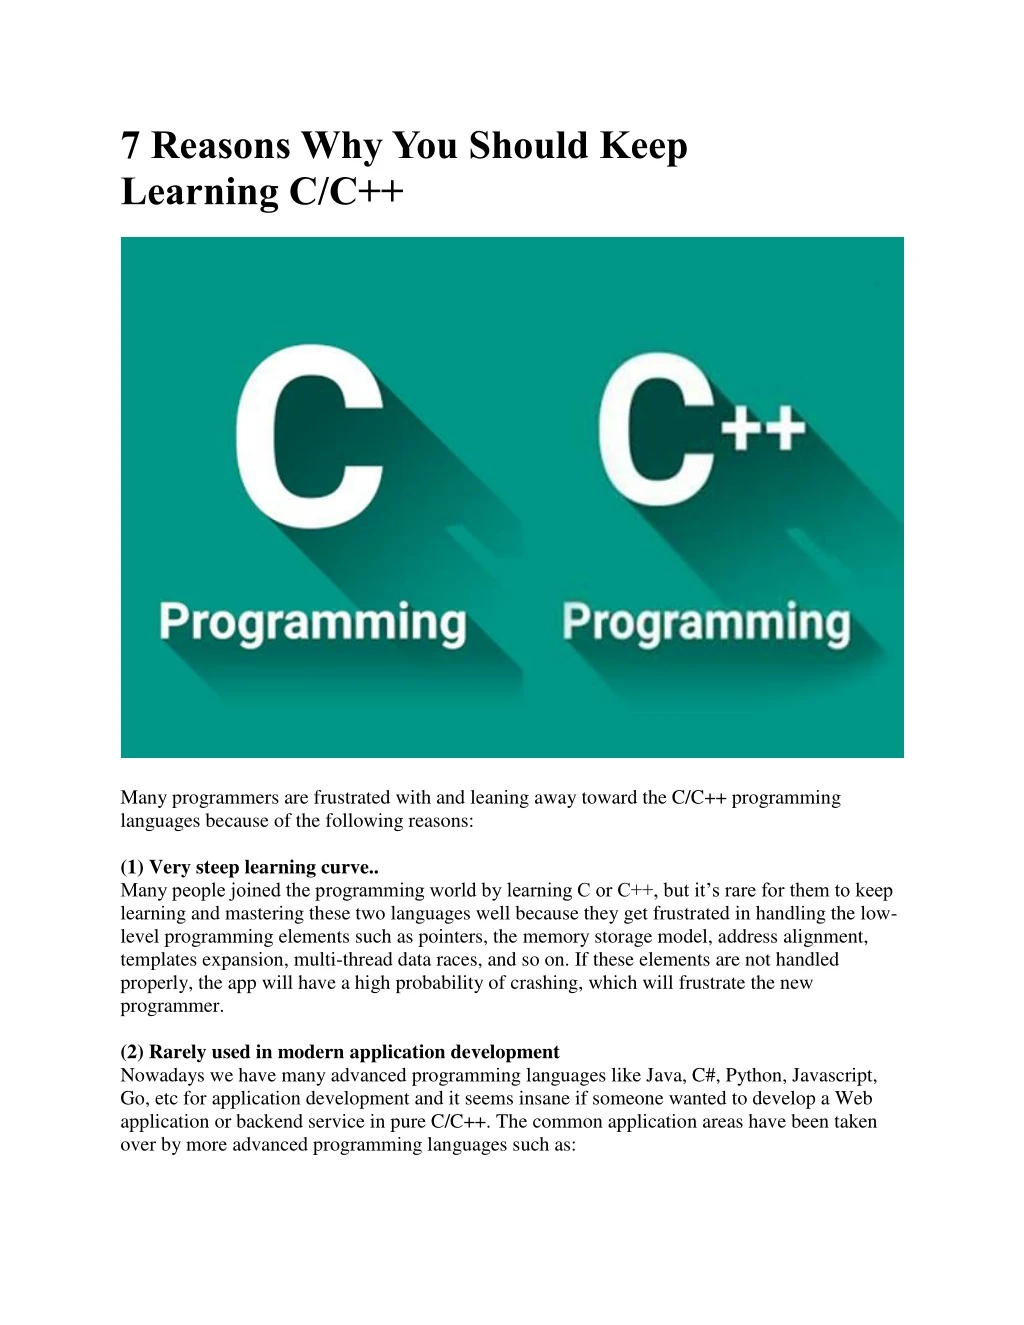 7 reasons why you should keep learning c c